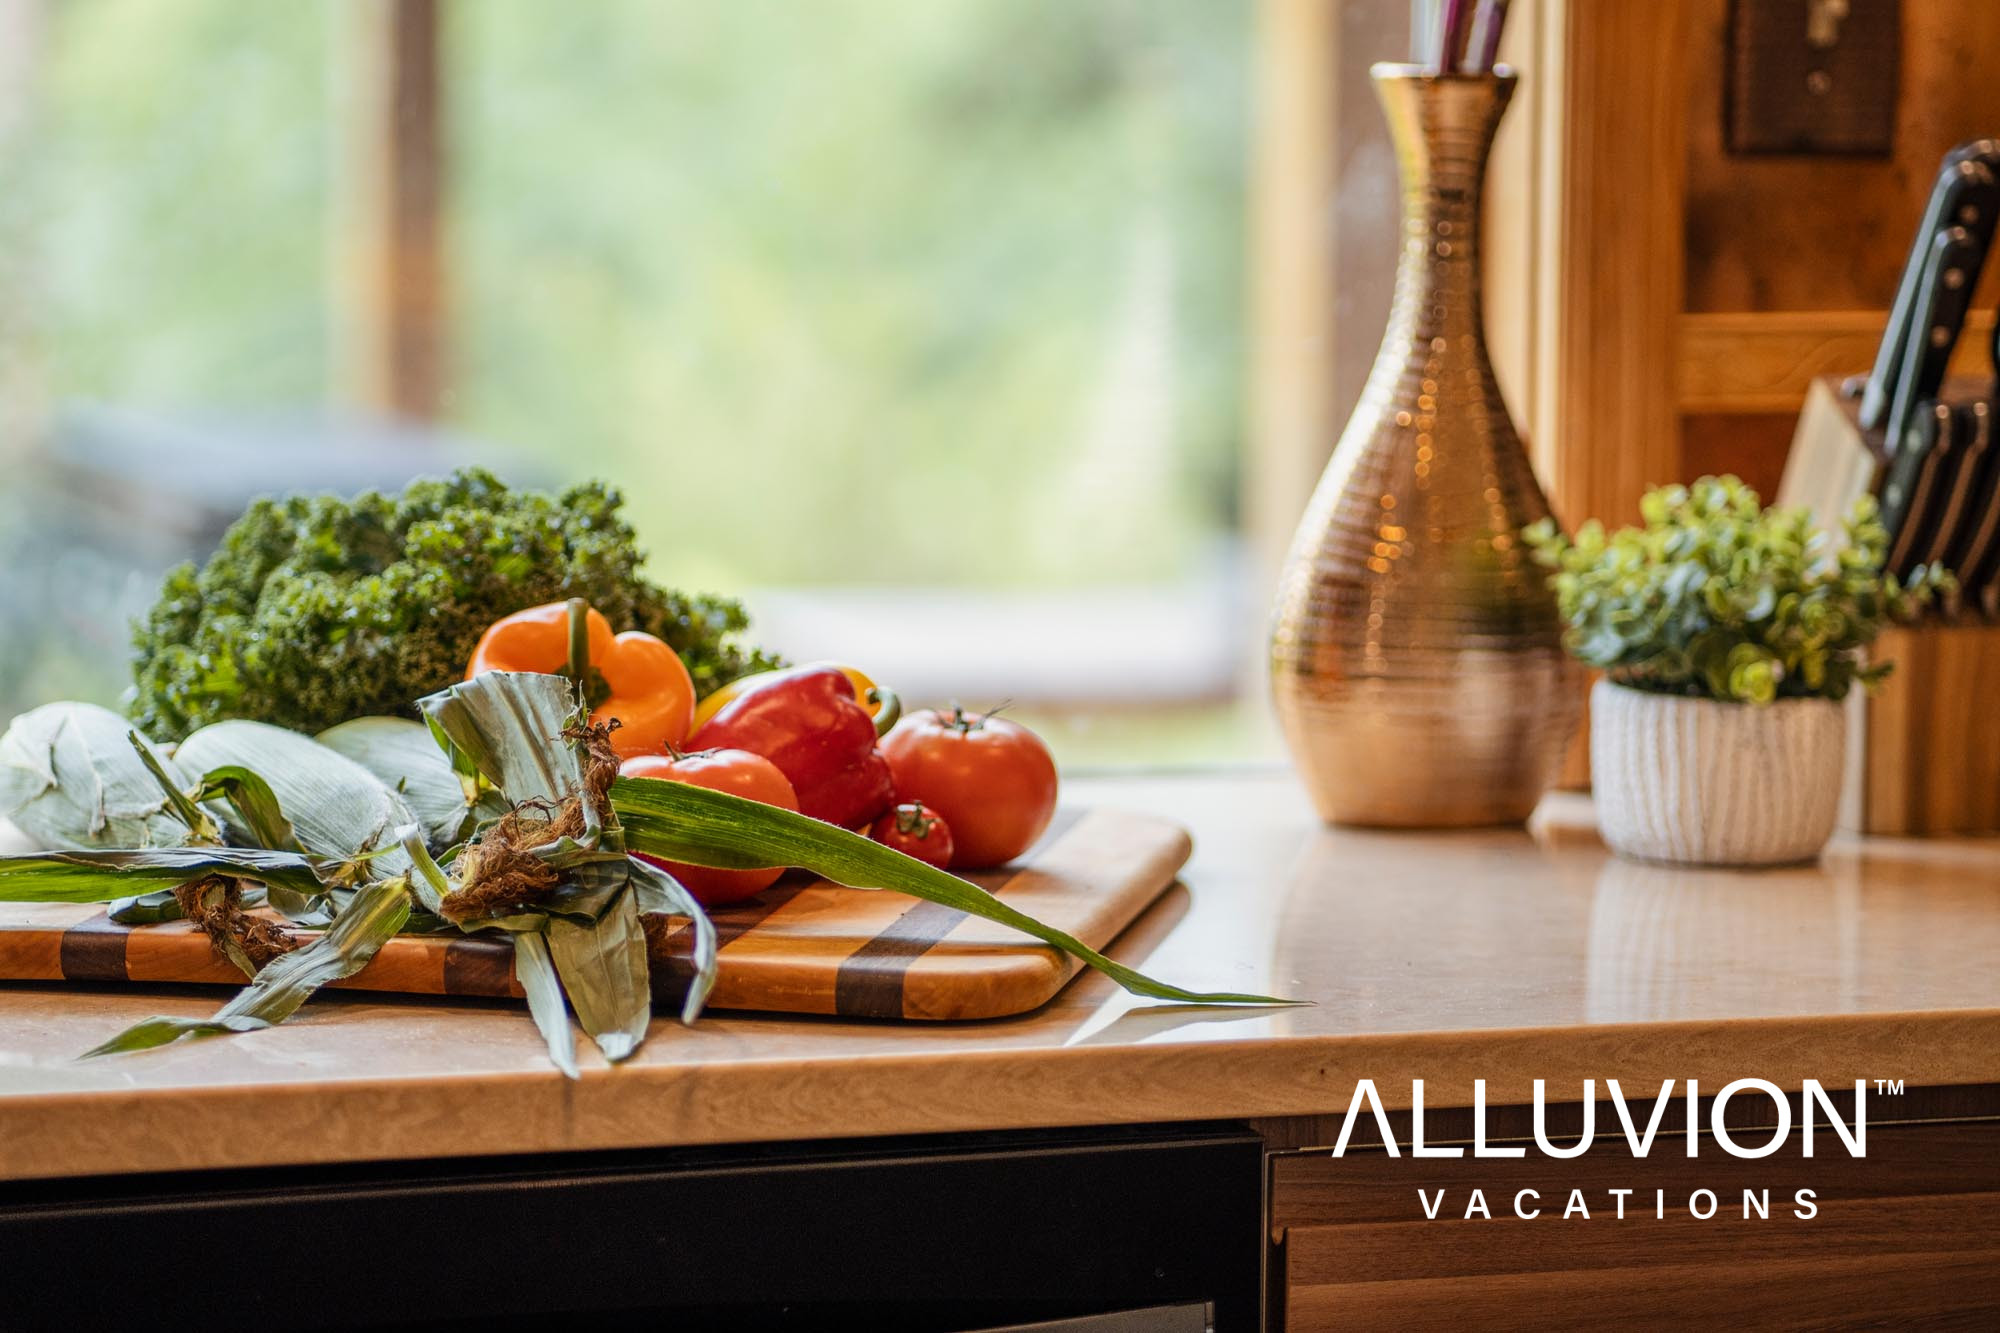 Luxury Experience Upgrades at the Alluvion Vacation Properties